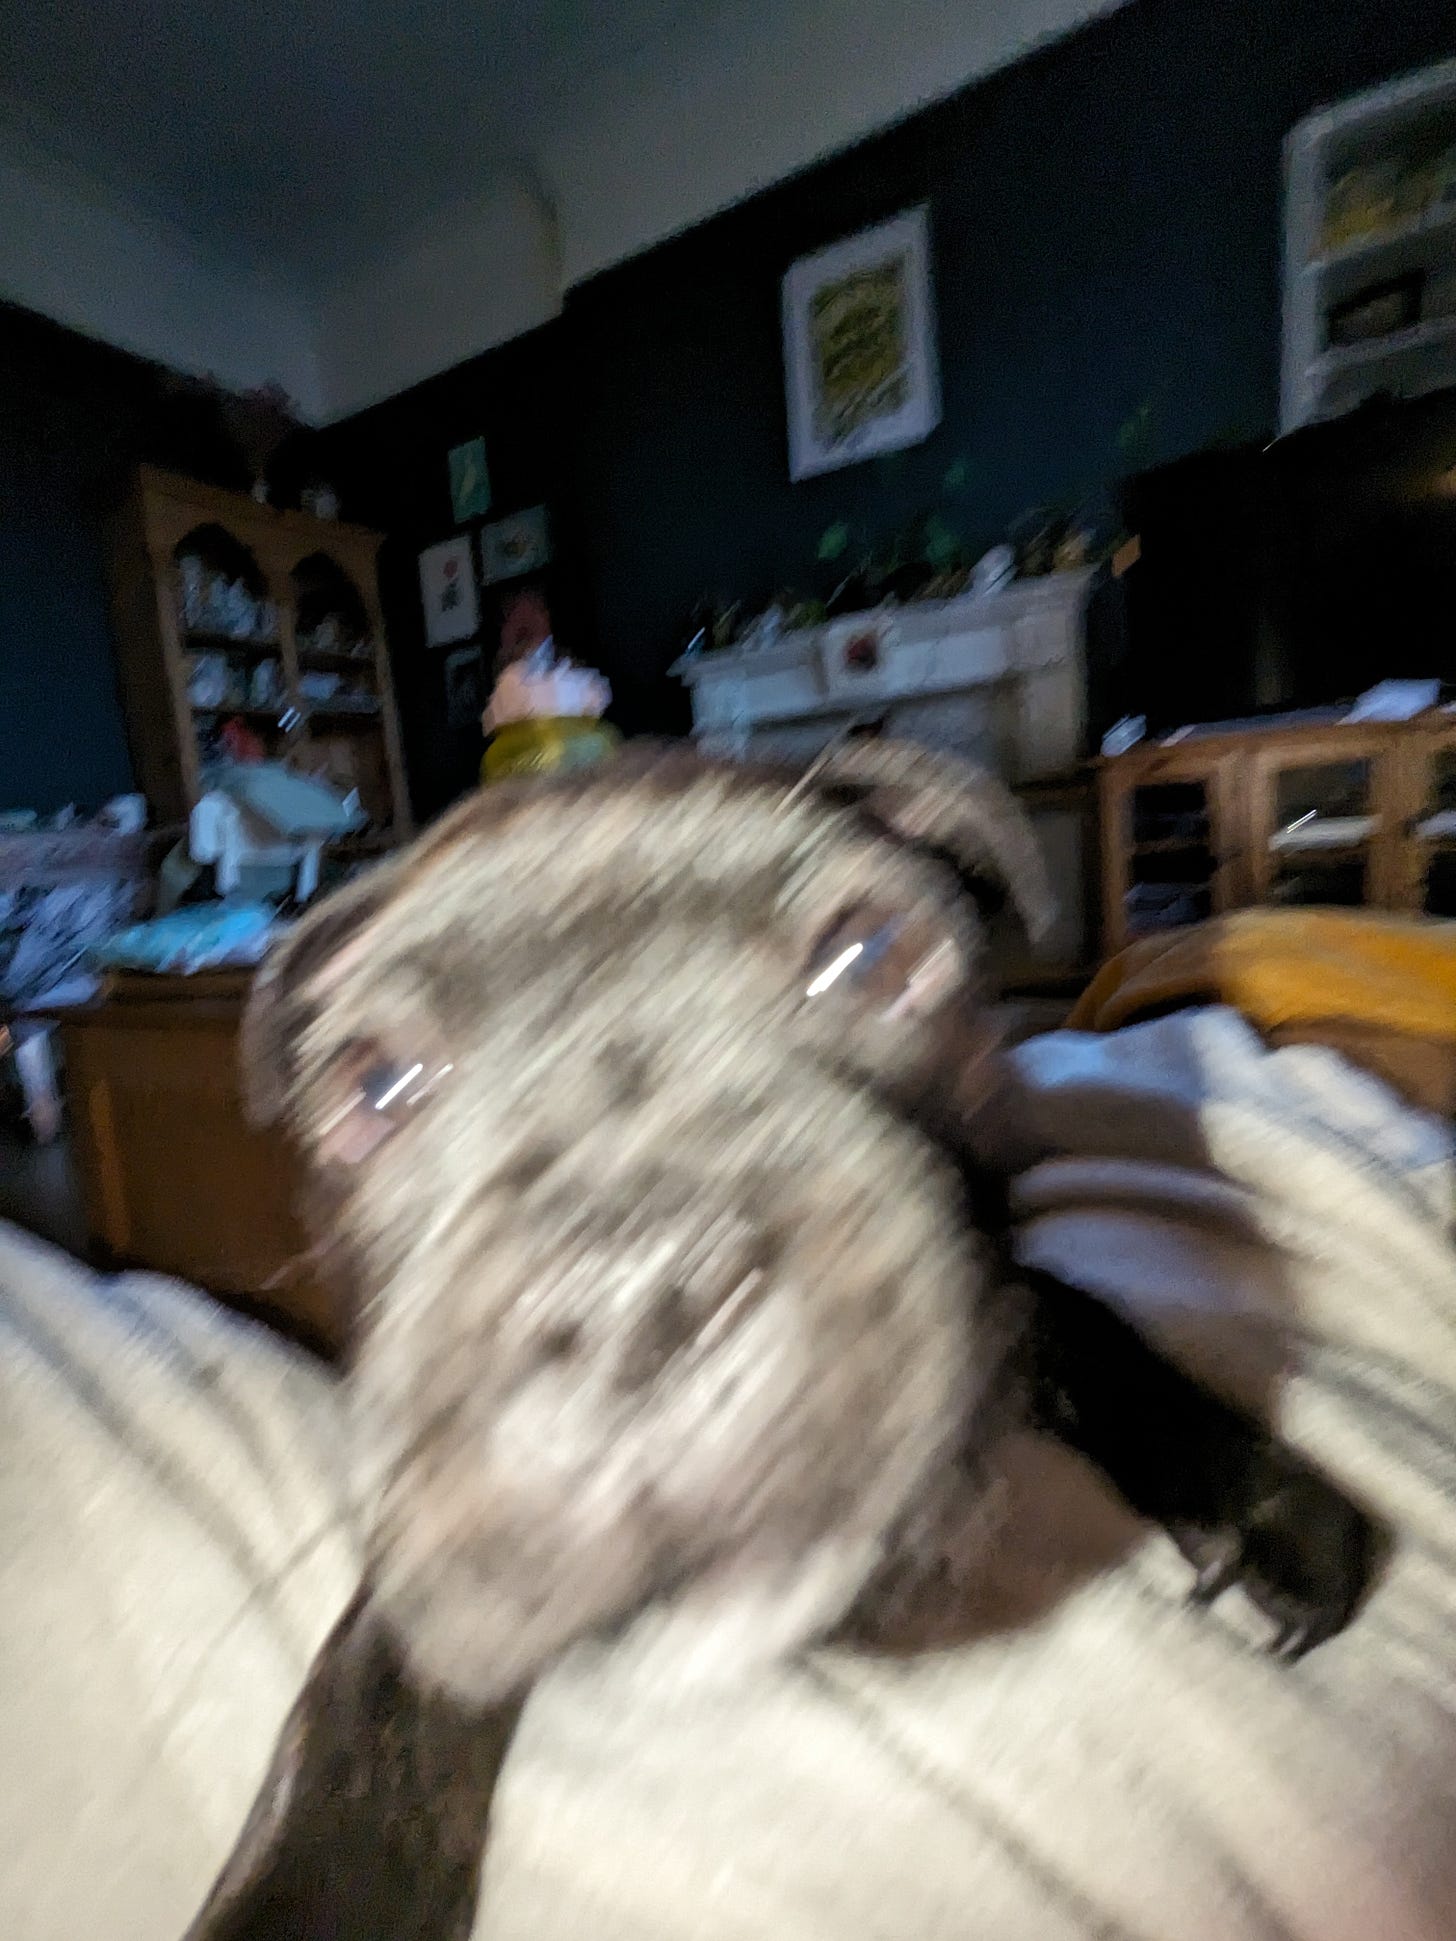 Blurry photos of Staffordshire Bull Terrier puppy